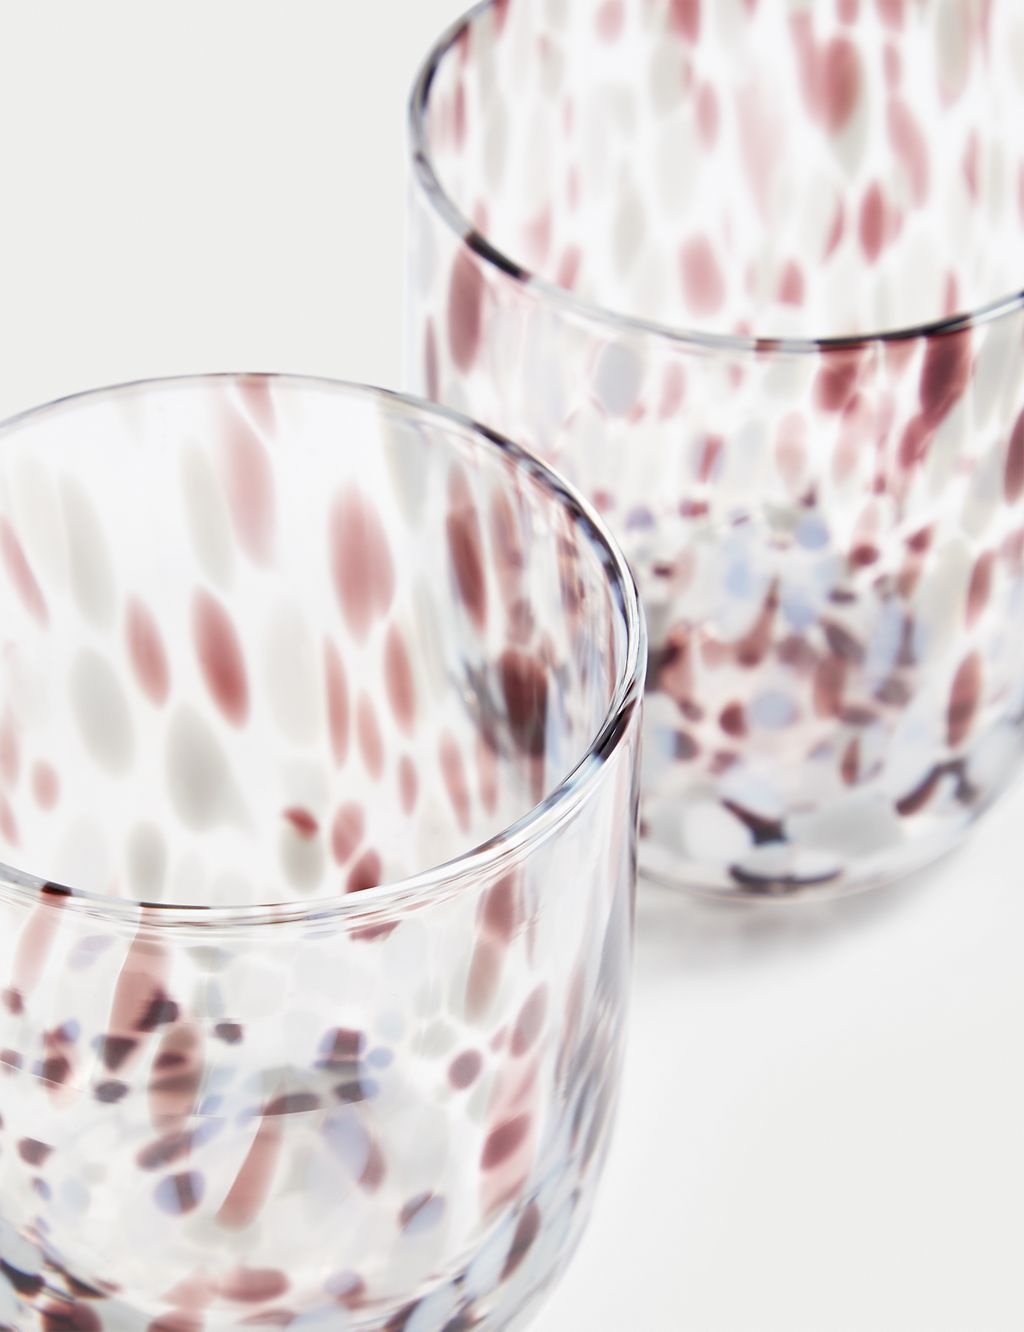 Set of 2 Speckled Tumblers 1 of 6